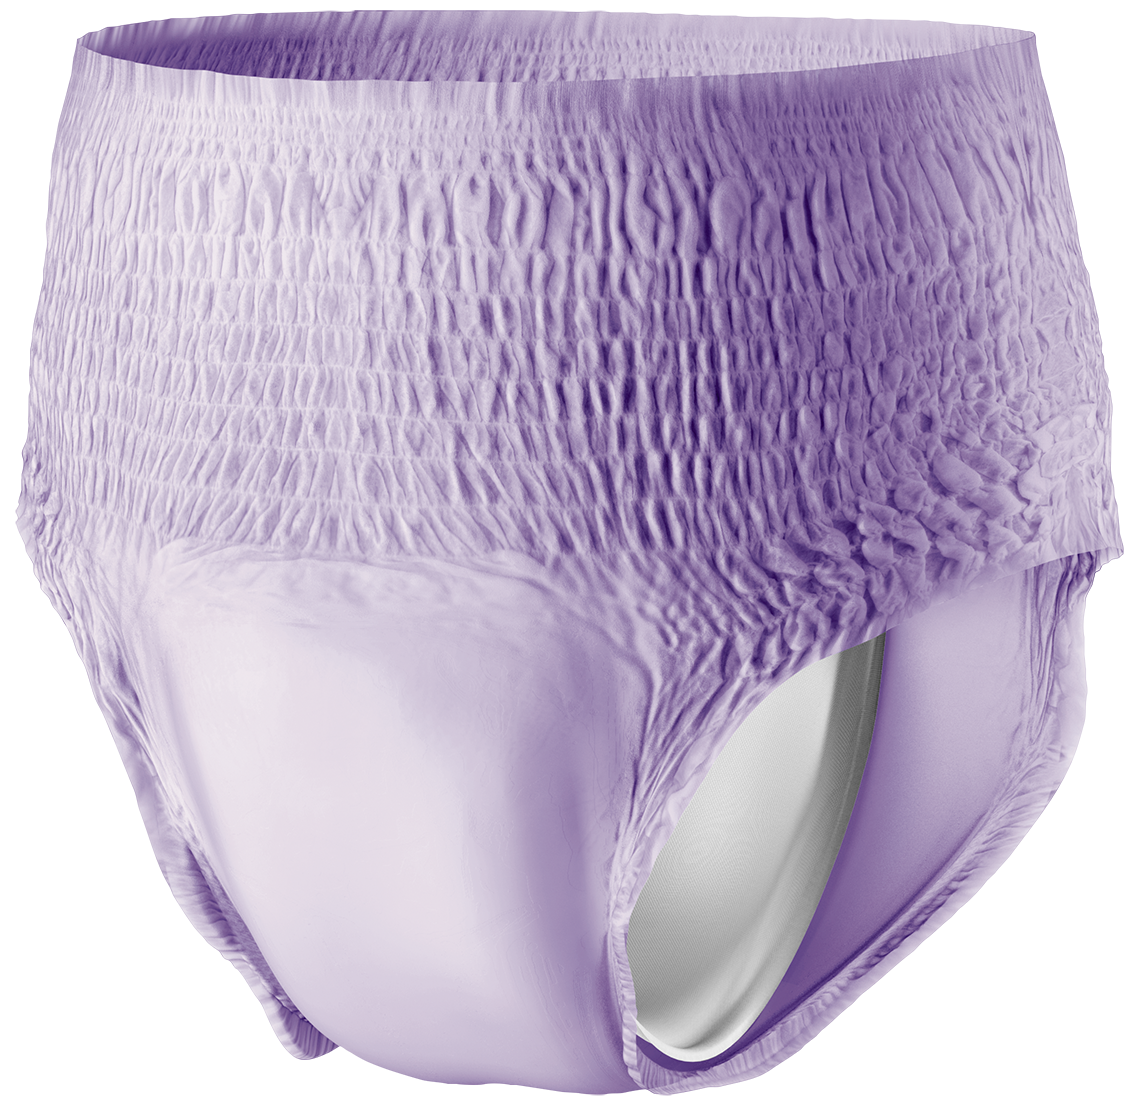 Prevail Incontinence Underwear for Women, Maximum Absorbency